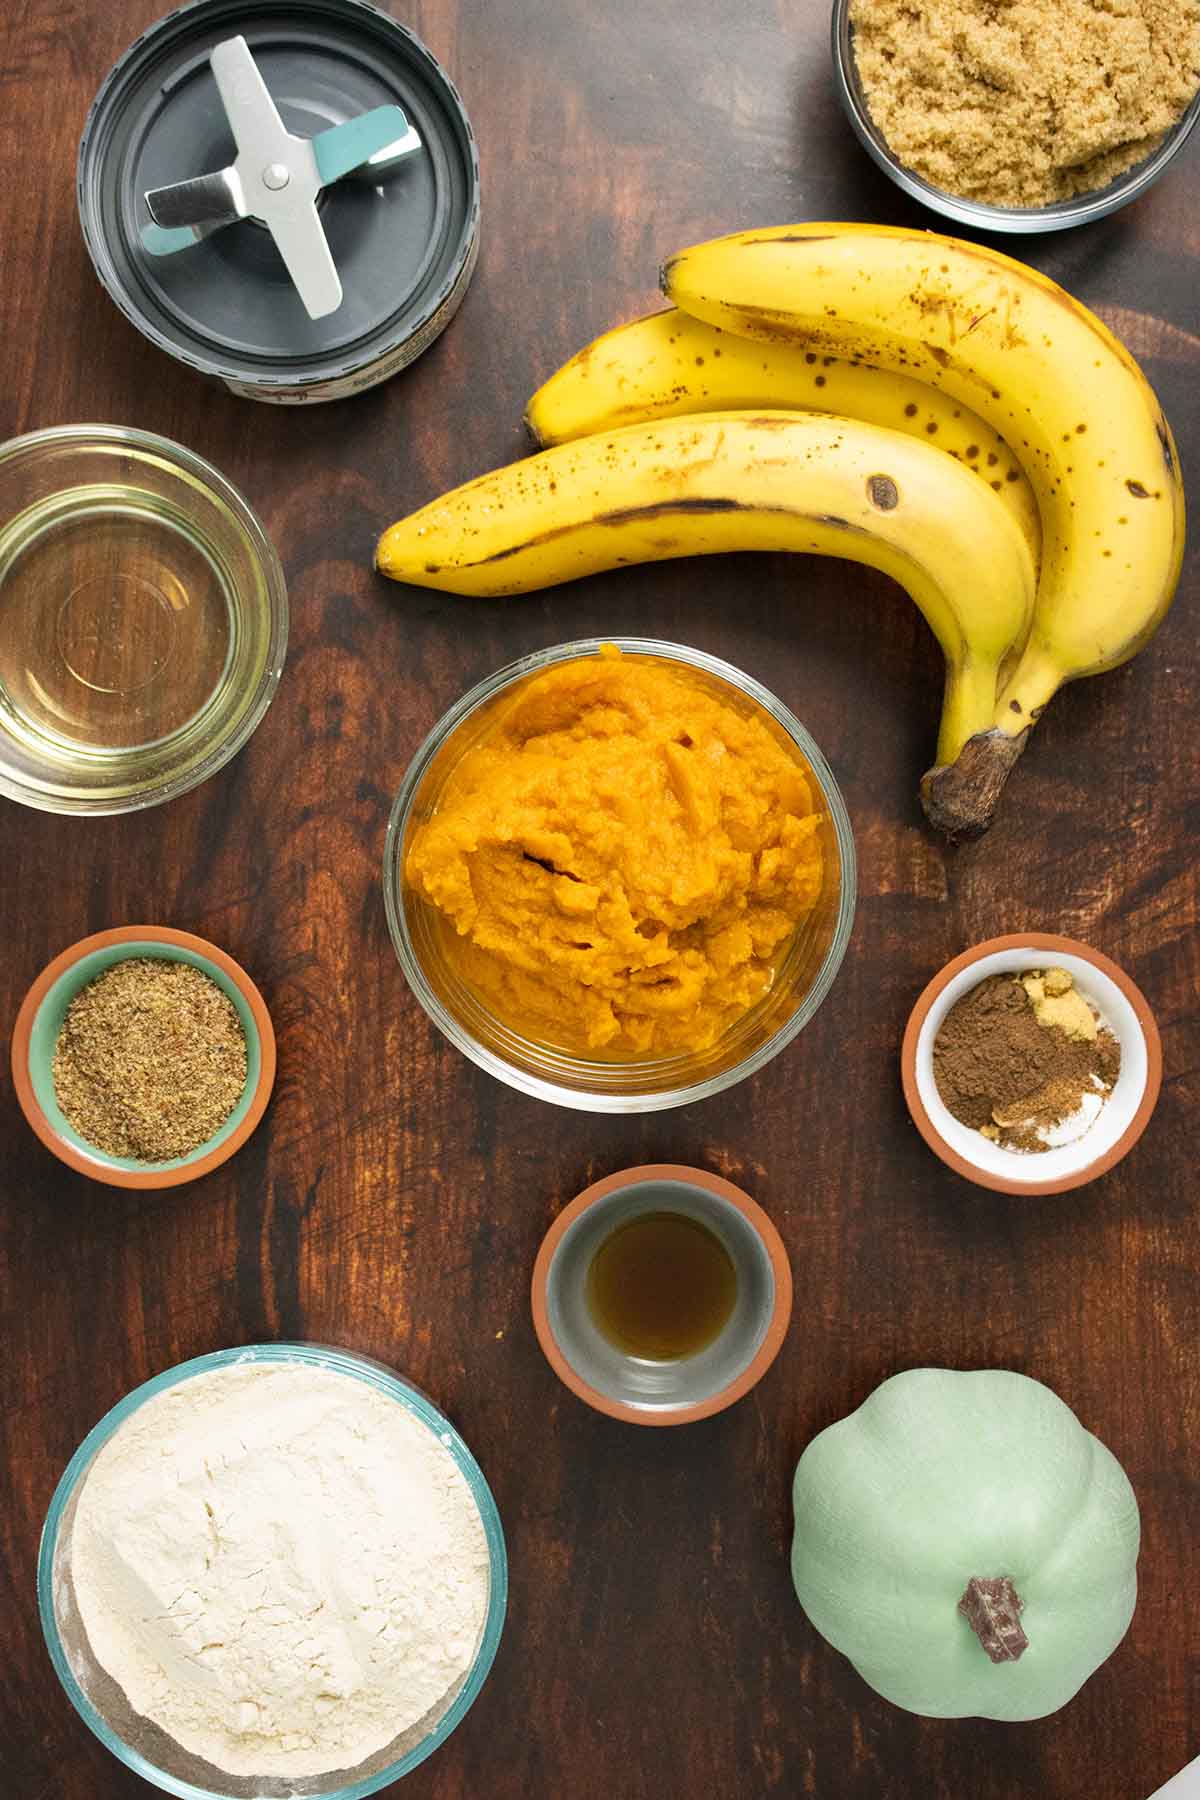 pumpkin puree, bananas, flour, and spices on a wooden countertop